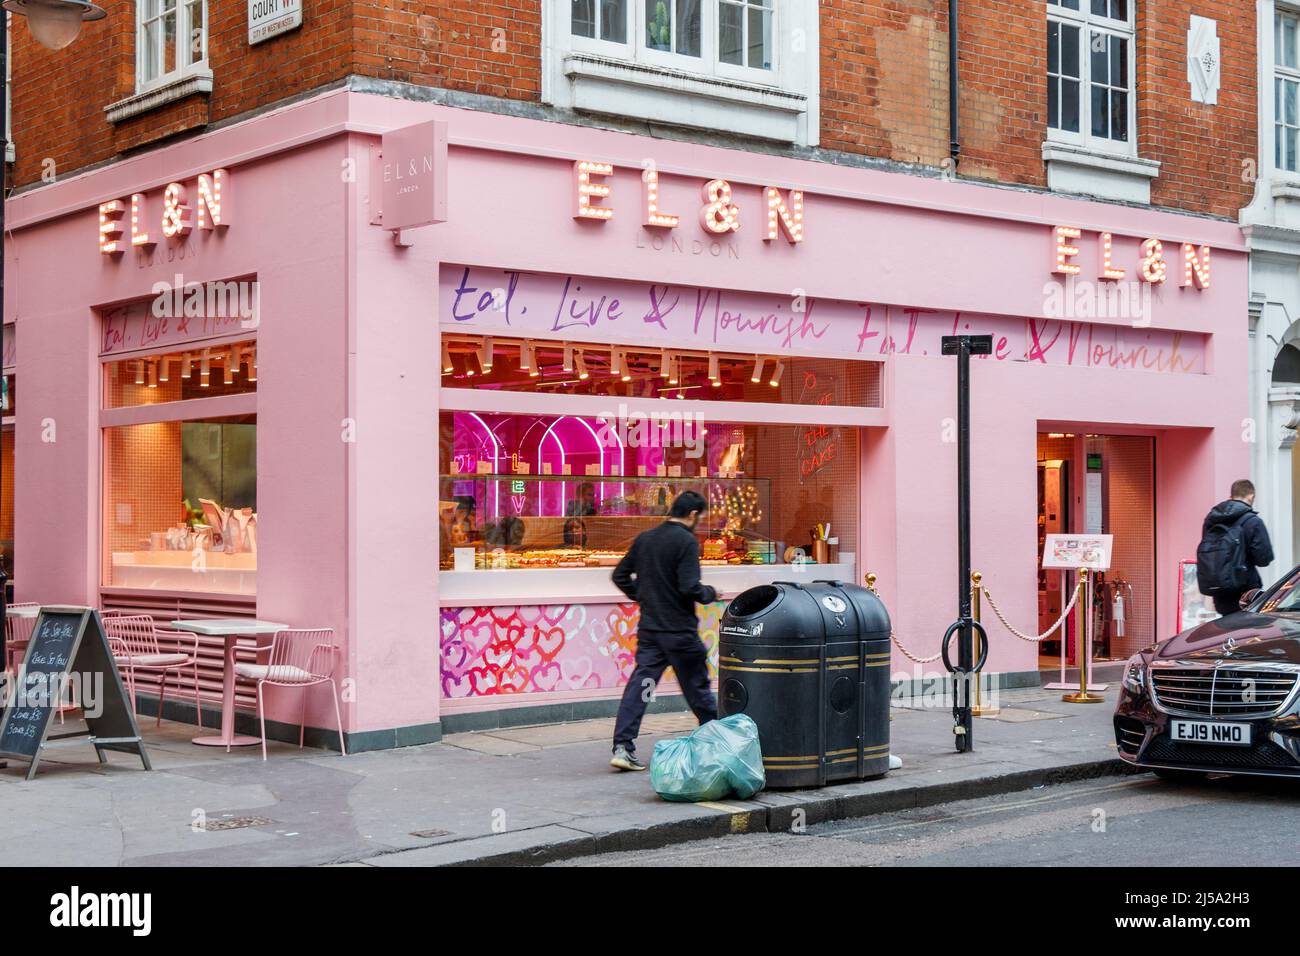 EL&N (Eat, Live and Nourish), a pink venue serving brunch, desserts, cakes, fancy coffees and mocktails in Wardour Street, Soho, London, UK Stock Photo